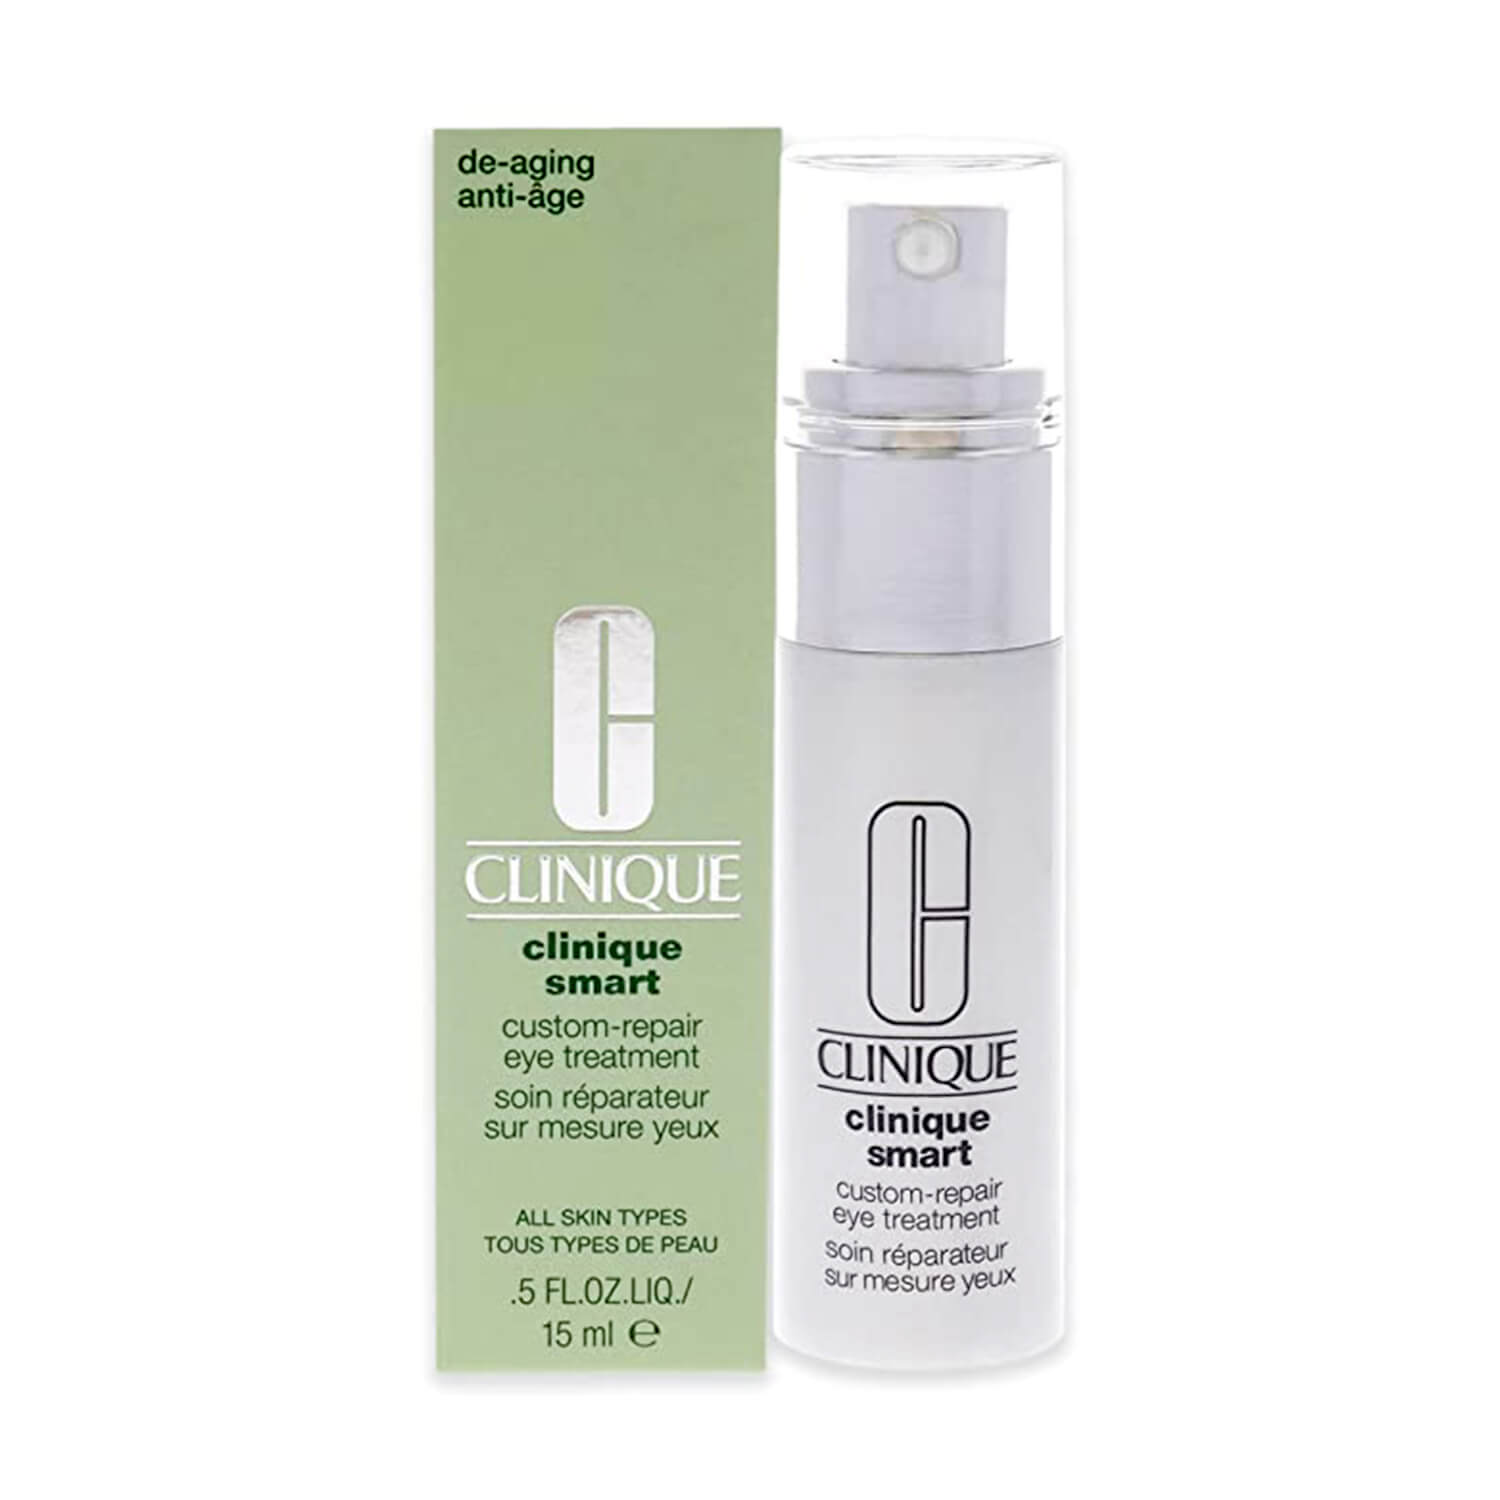 Buy Clinique eye repair treatment for anti-aging available at heygirl.pk for cash on delivery in Karachi, Lahore, Islamabad, Rawalpindi across Pakistan. 